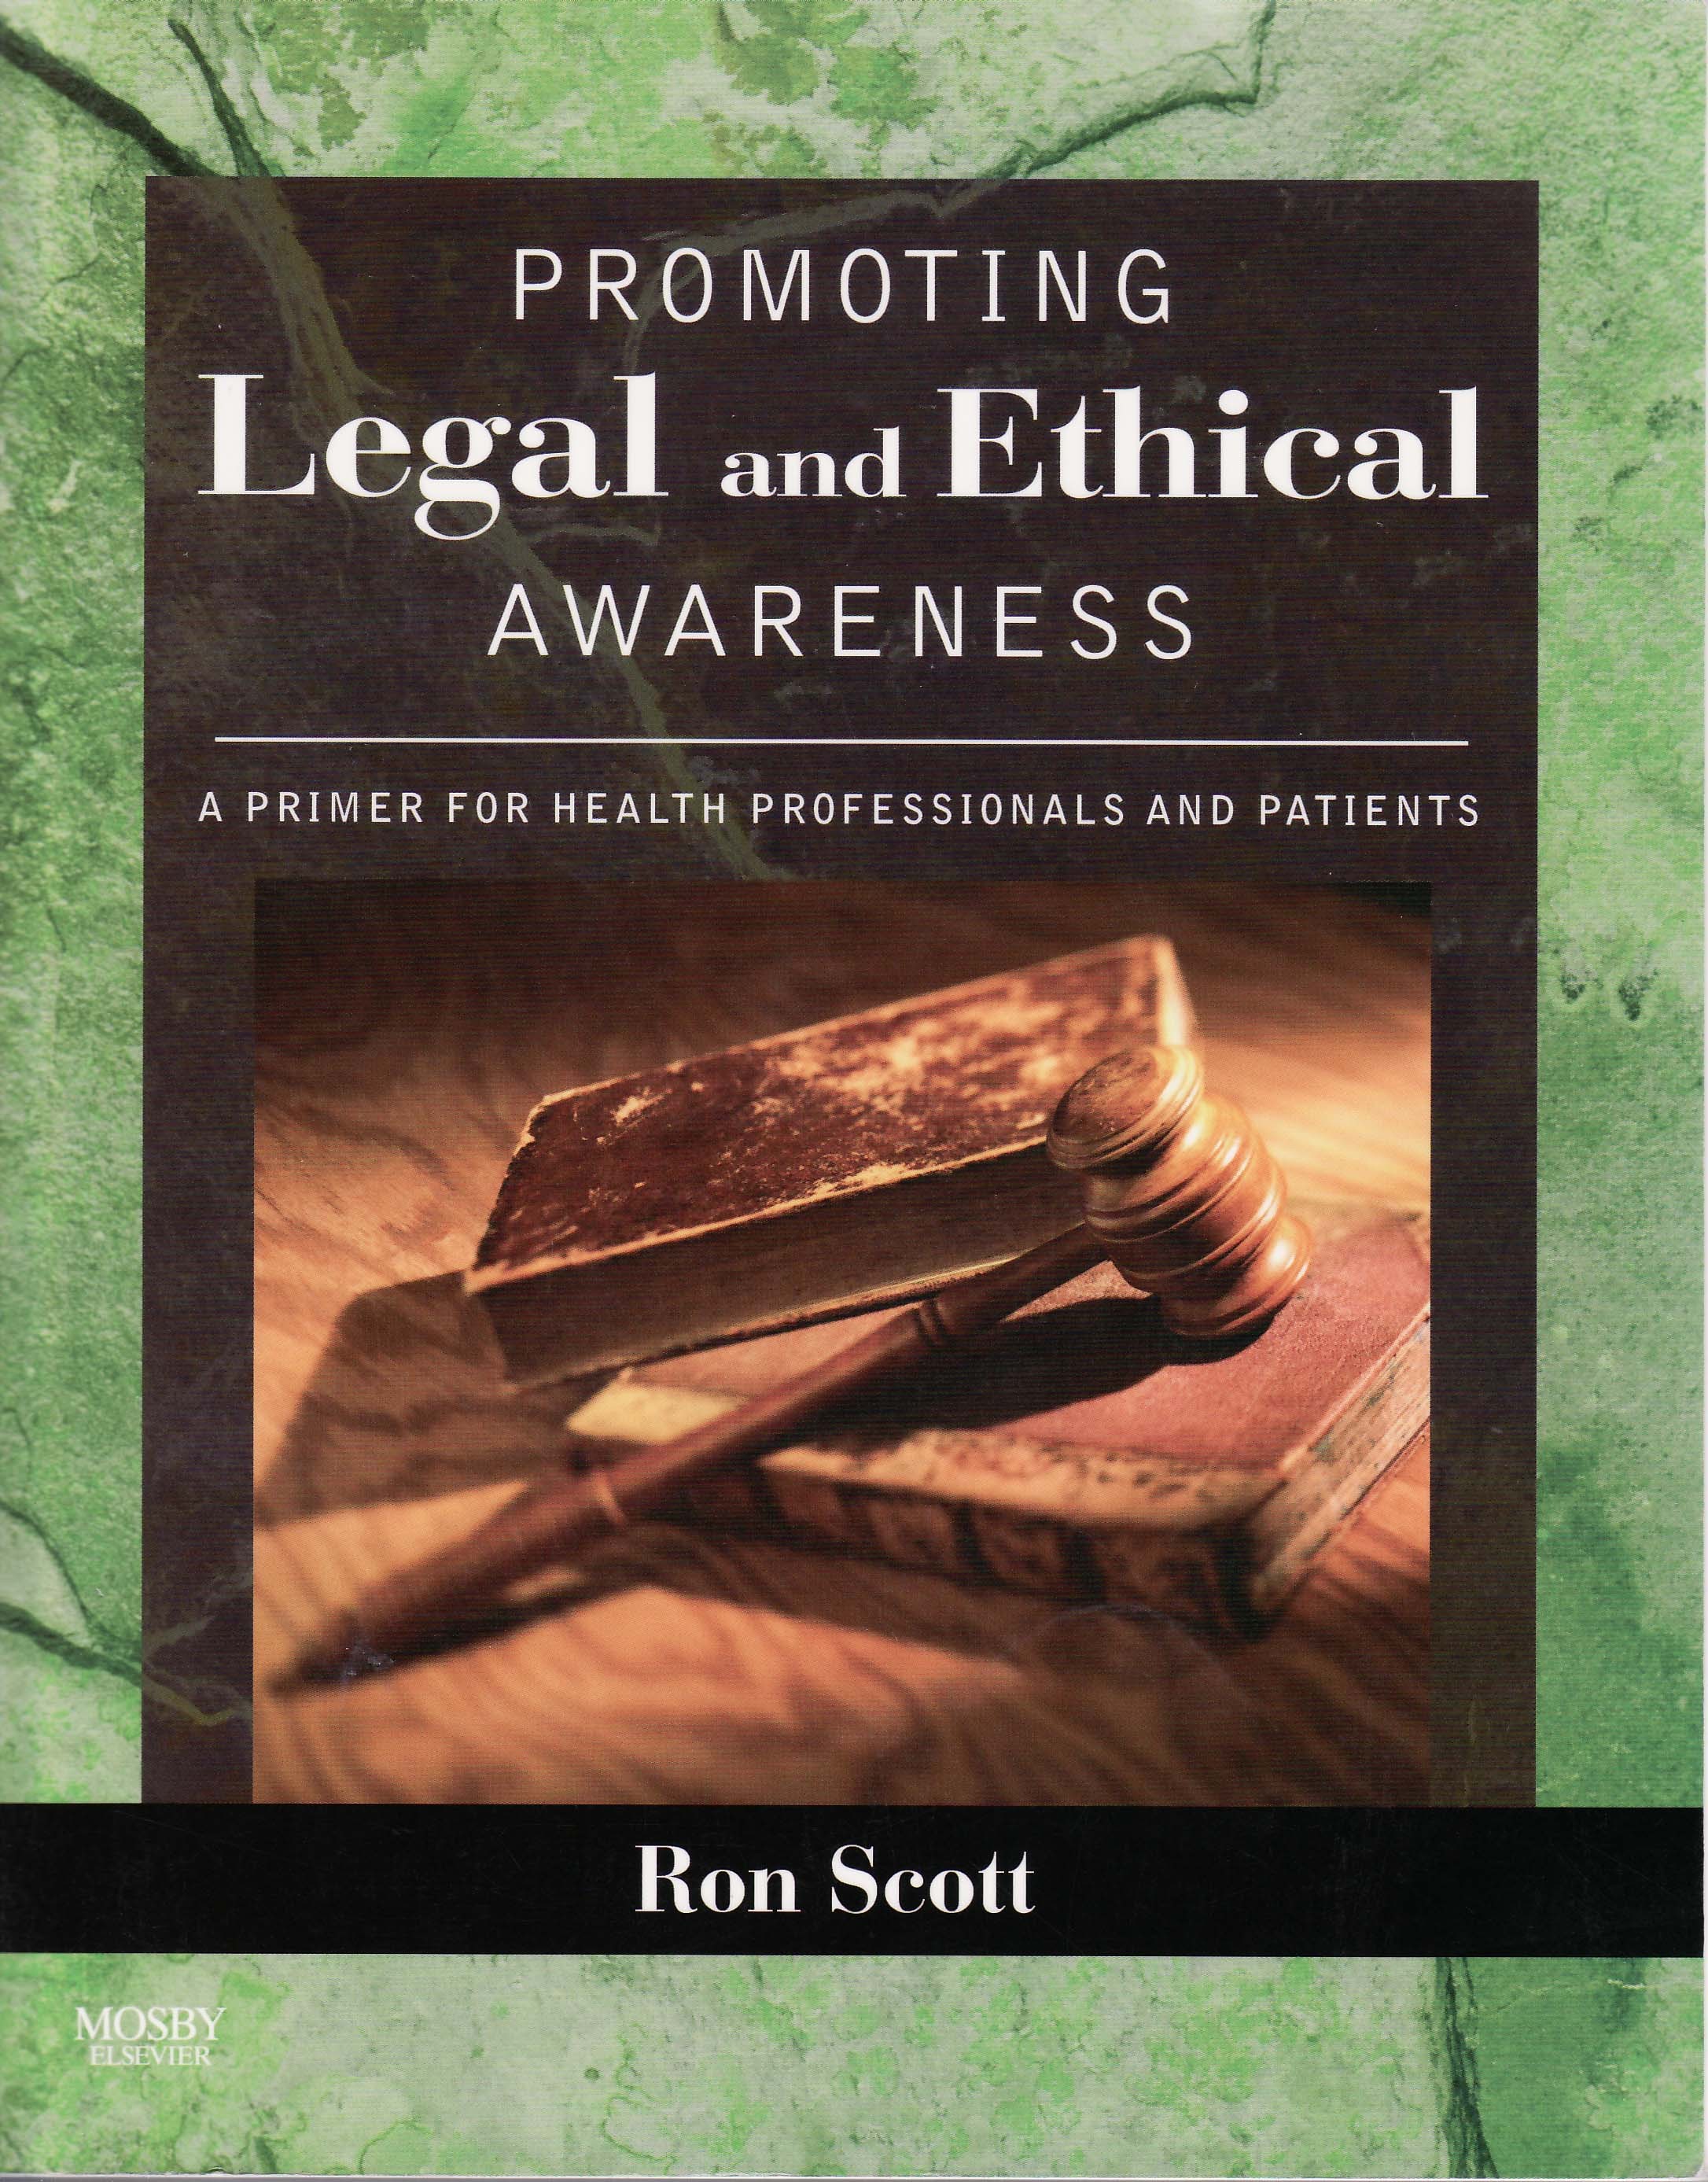 Promoting Legal & Ethical Awareness: Module 3 (Electronic Download)